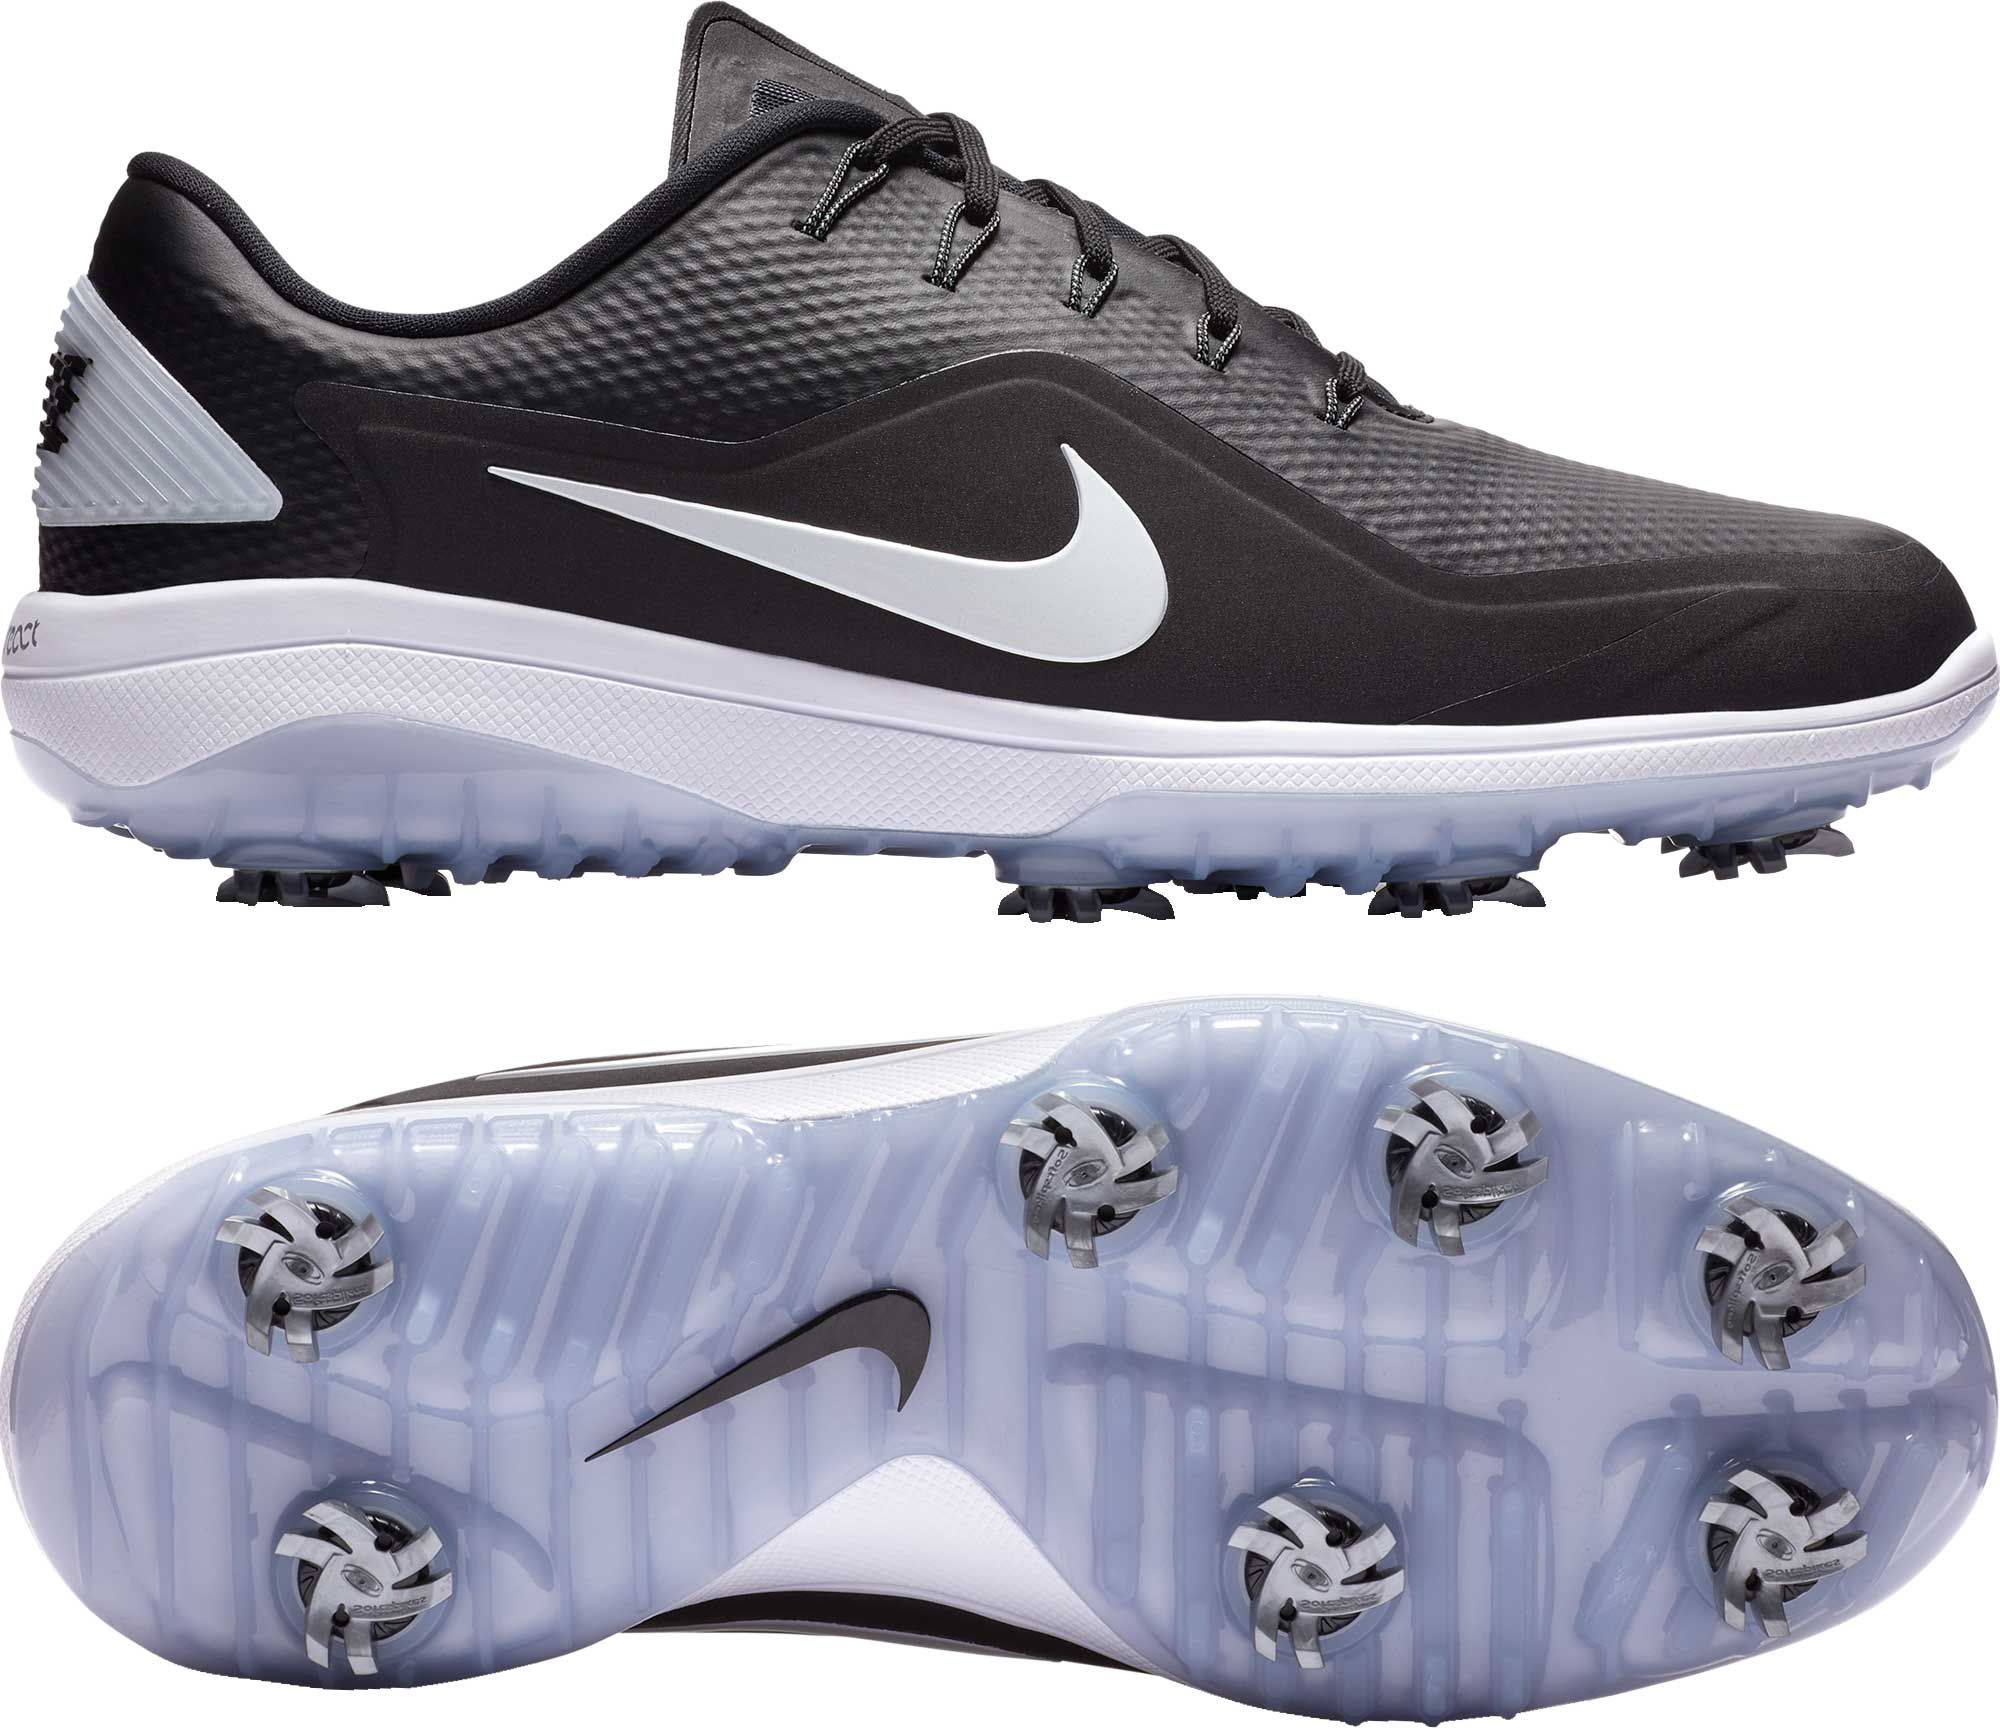 Nike Golf Shoes | Best Price Guarantee at DICK'S